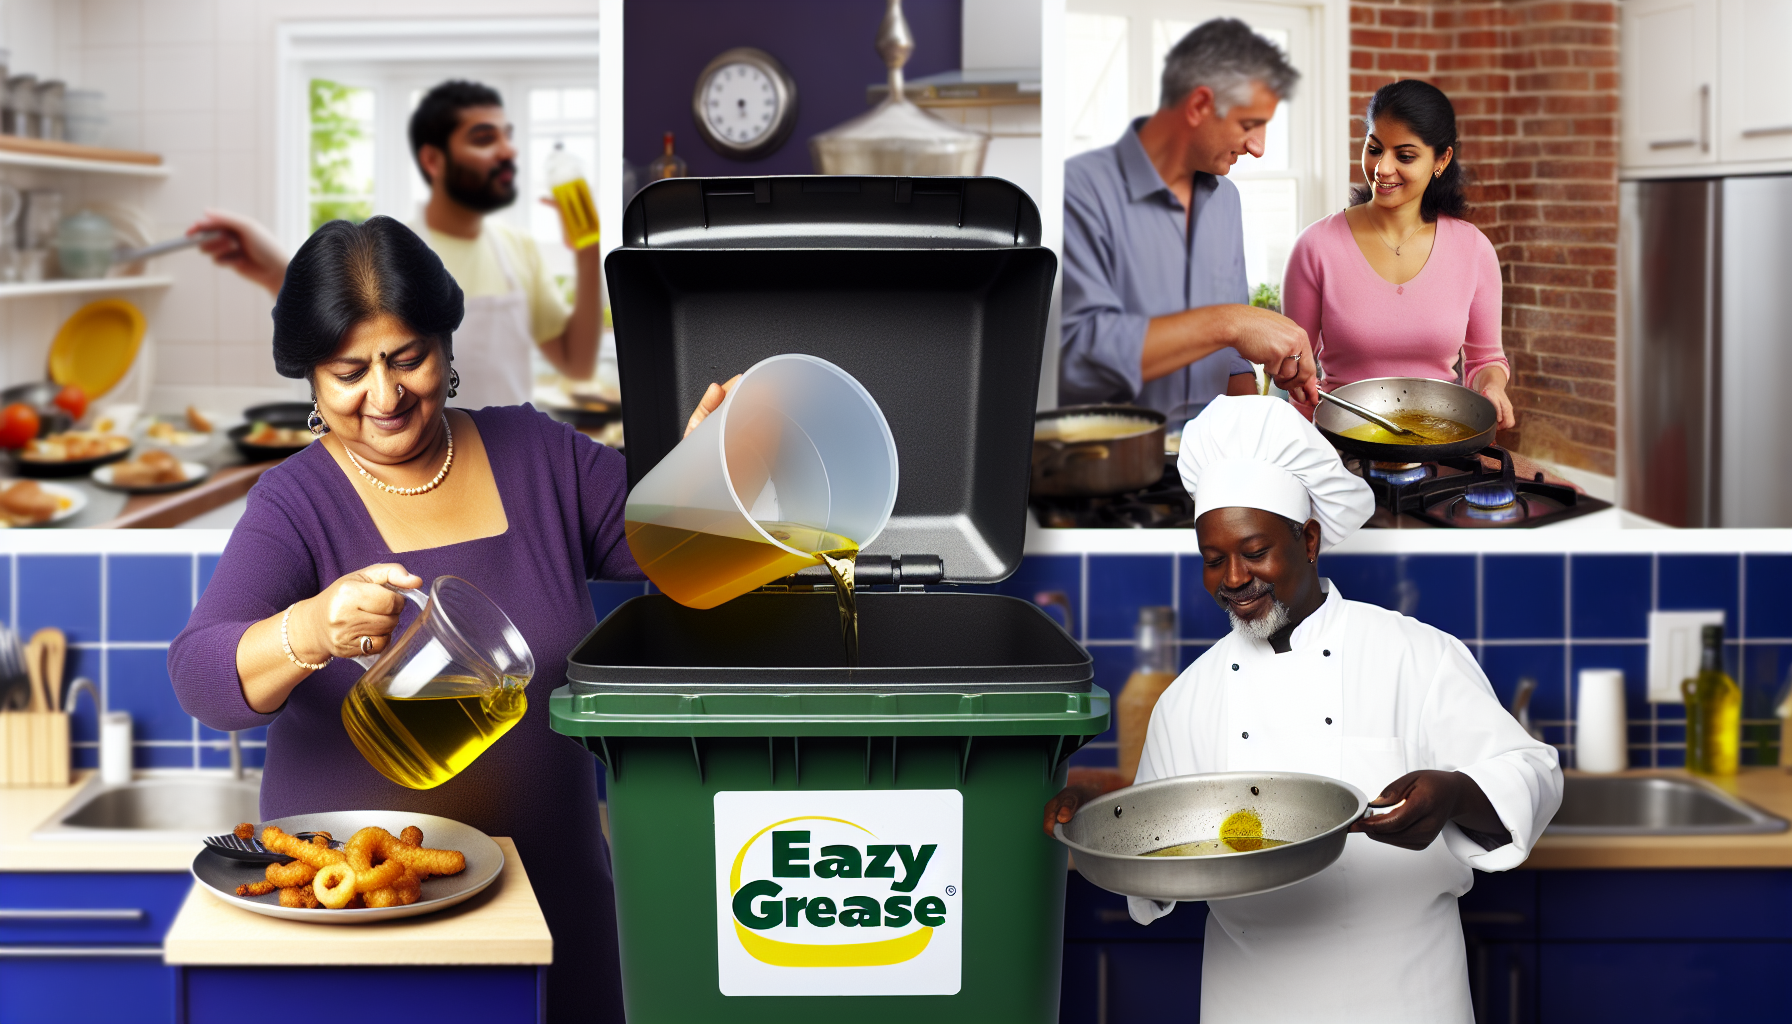 Eazy Grease residential and commercial recycling services